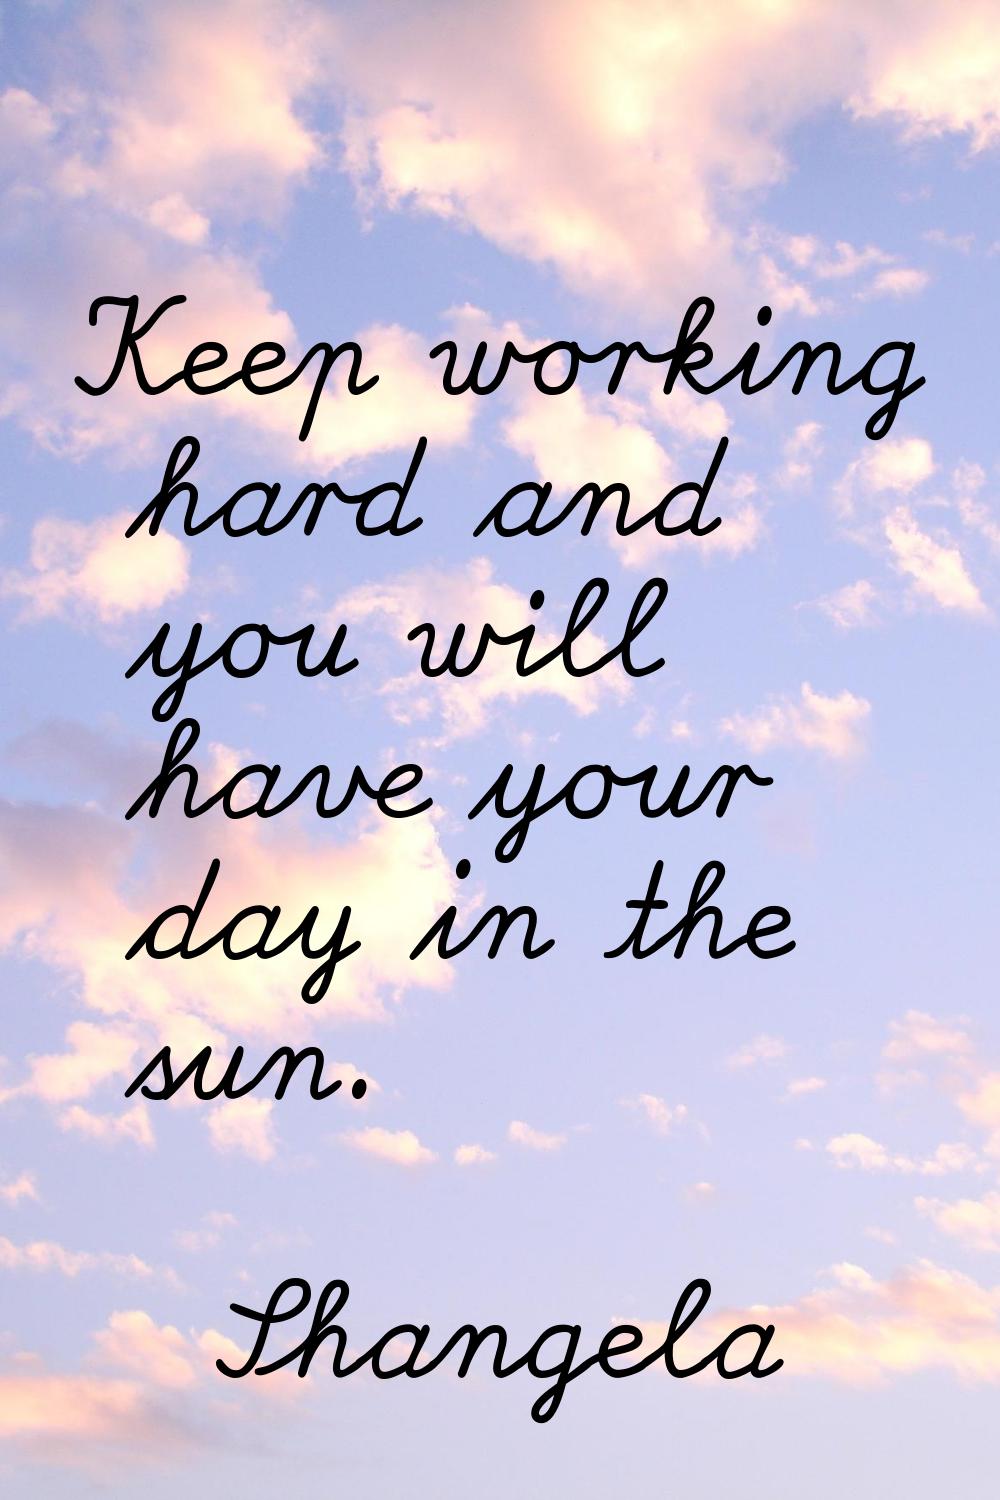 Keep working hard and you will have your day in the sun.